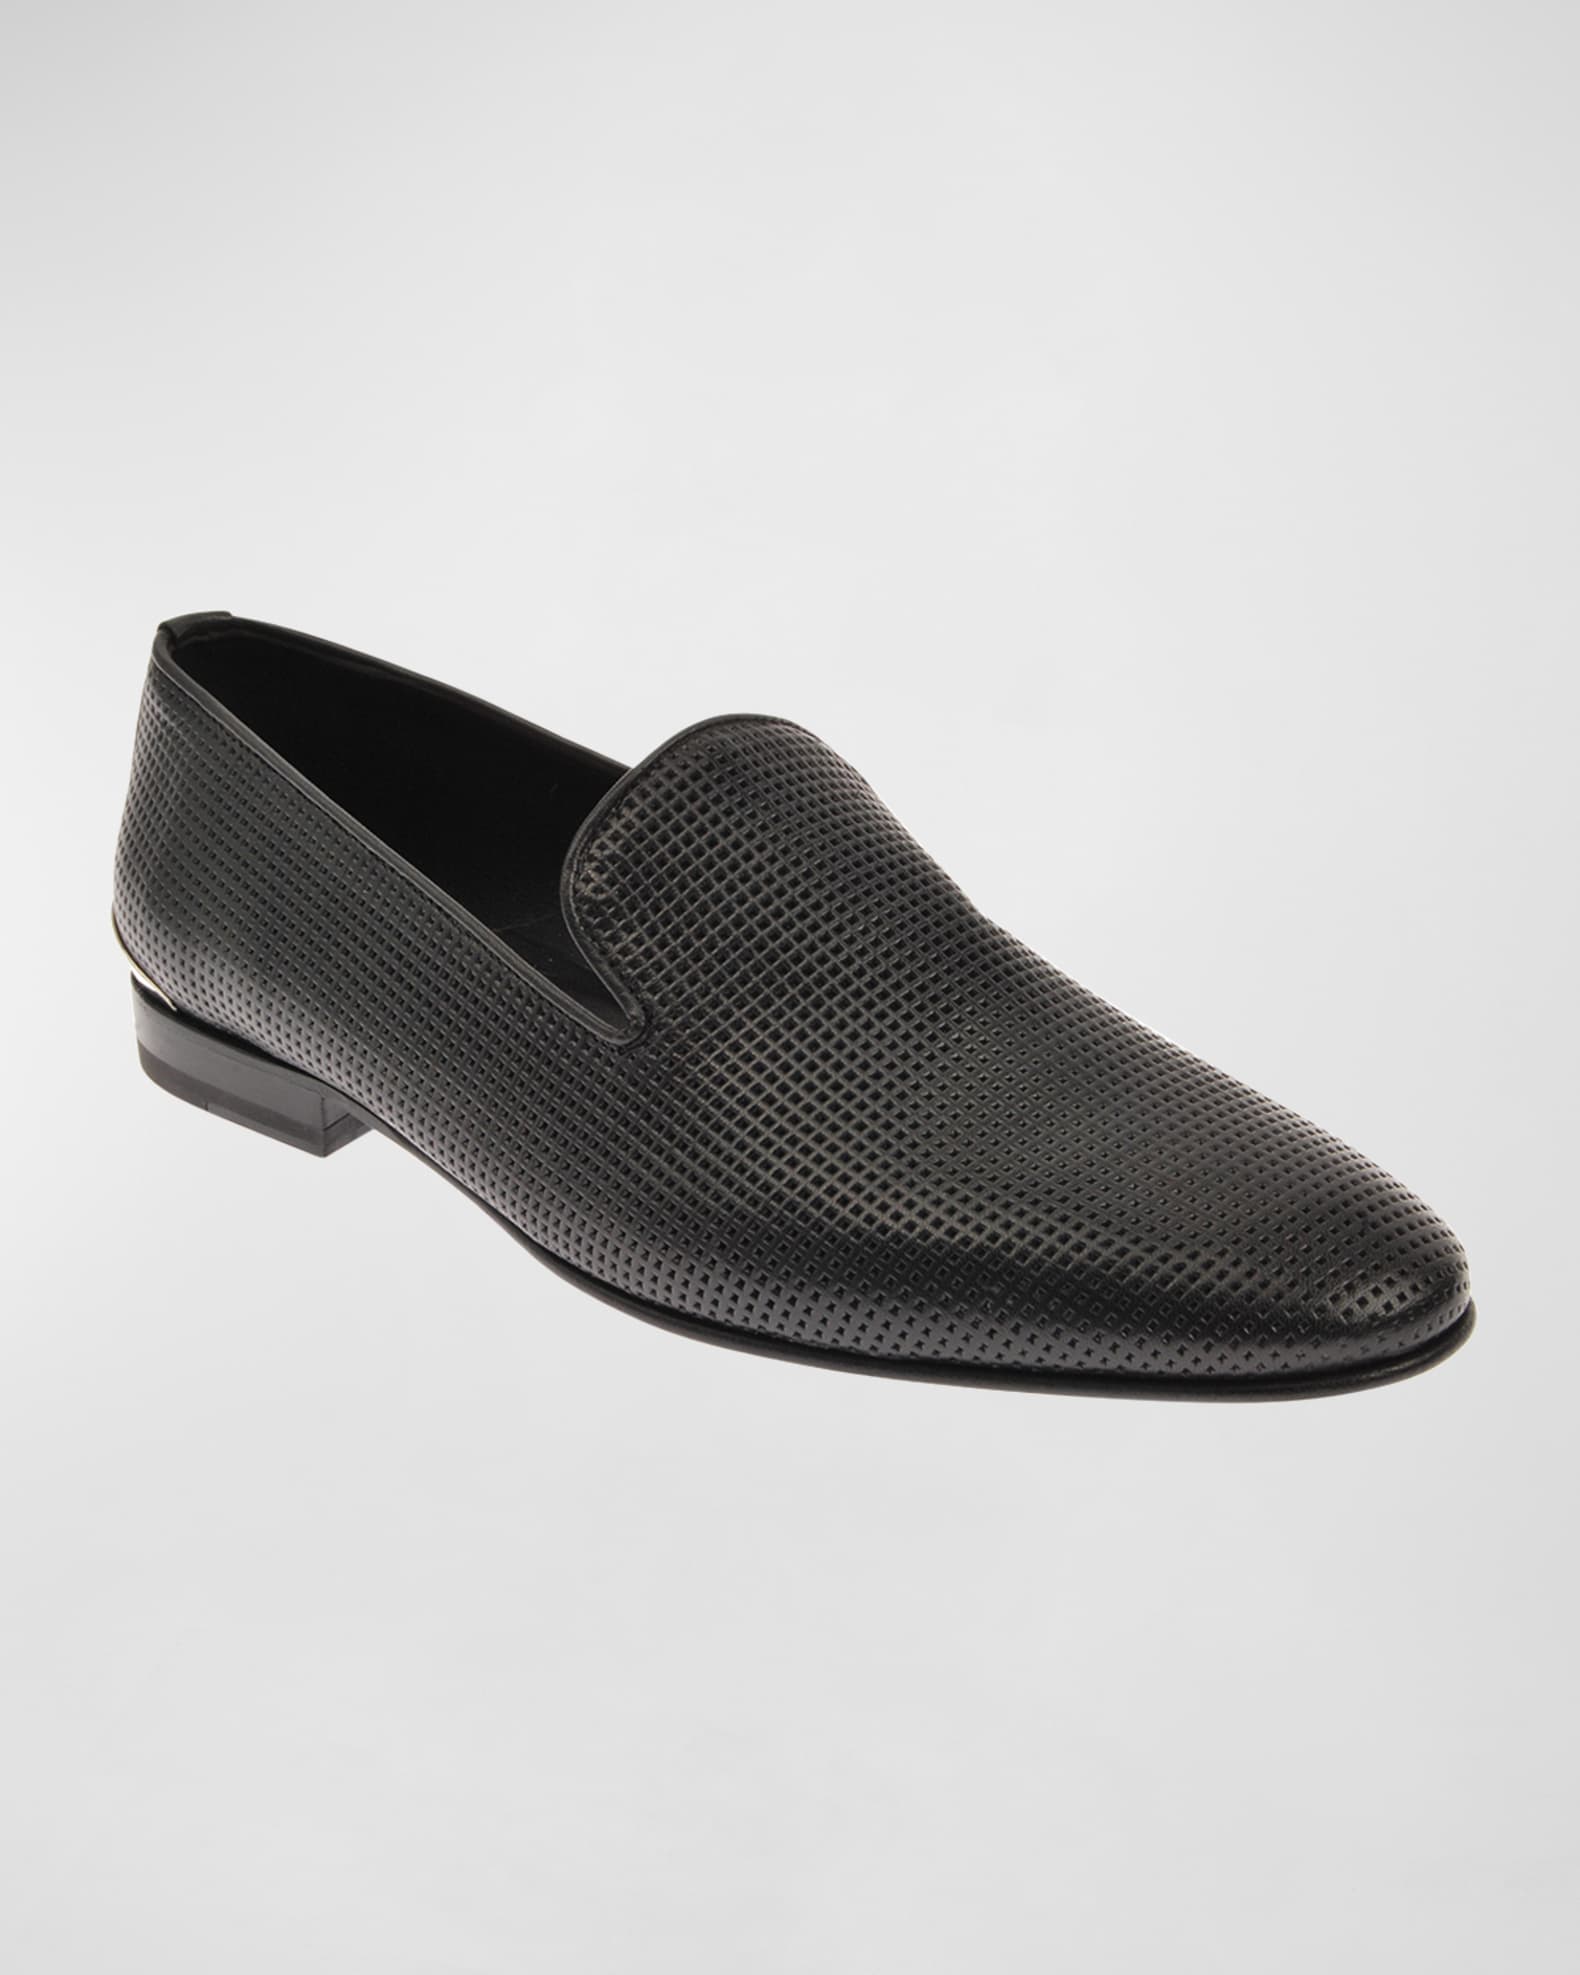 Costume National Men's Perforated Leather Loafers | Neiman Marcus